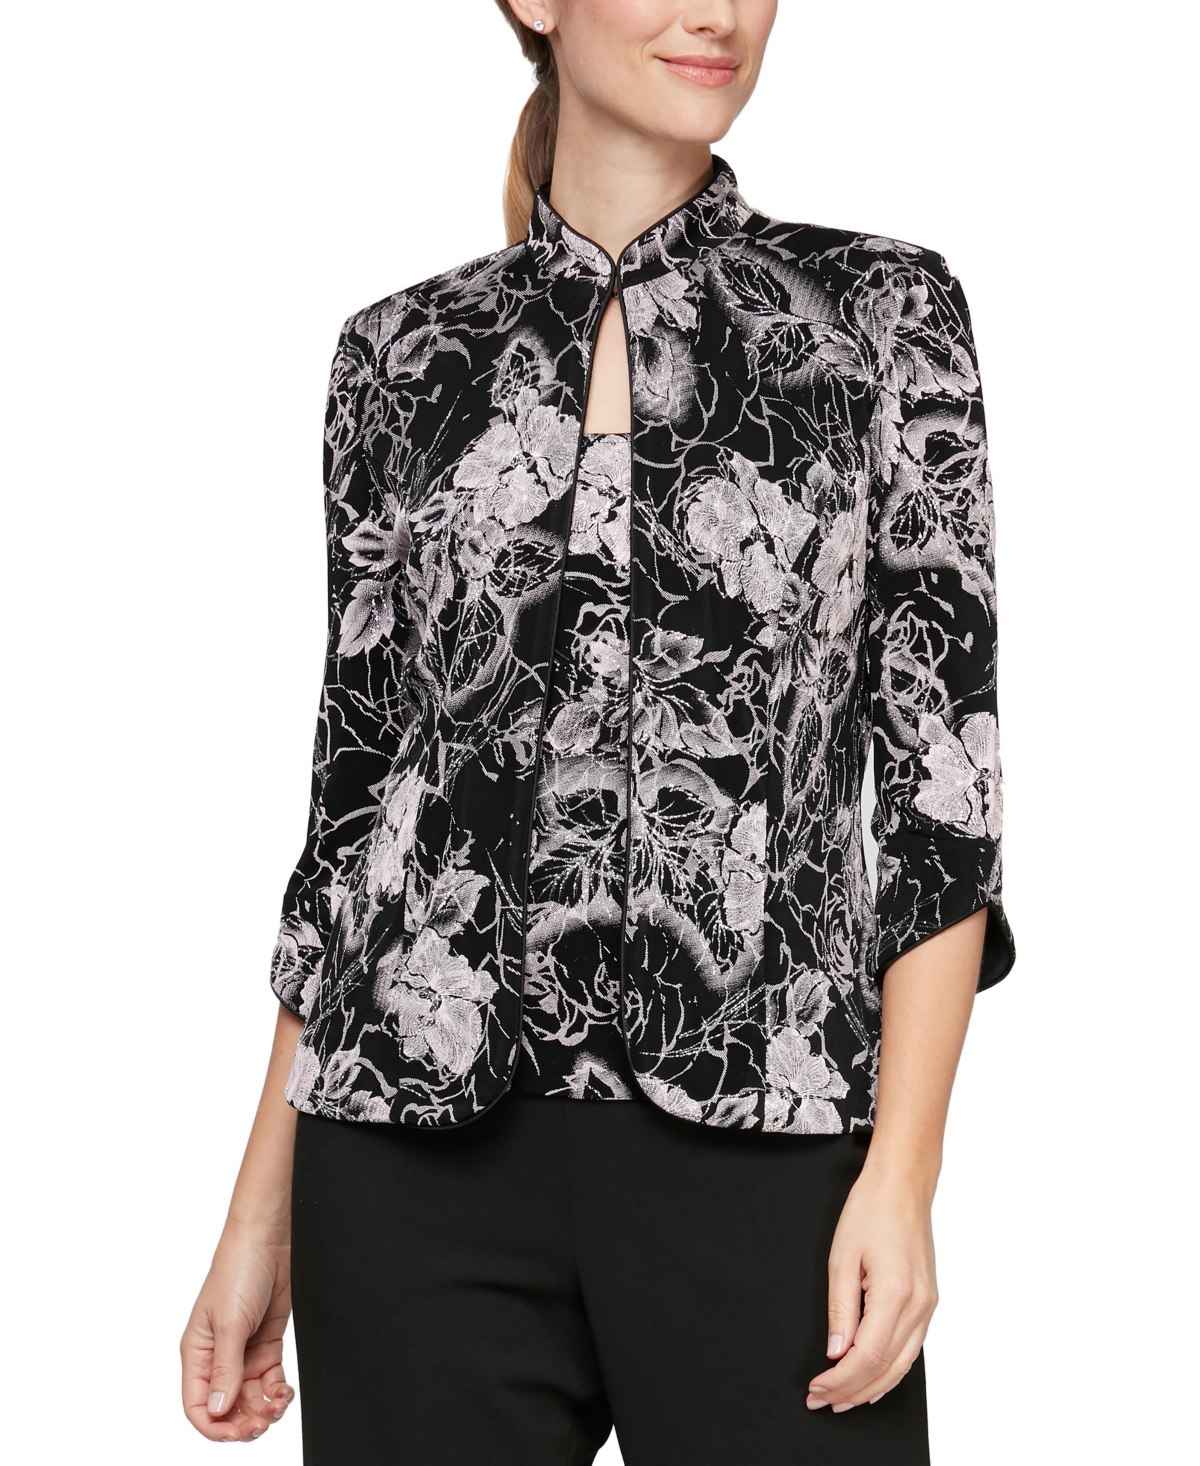 Alex Evenings Petite Glitter Floral Jacket And Top In Black Shell Pink